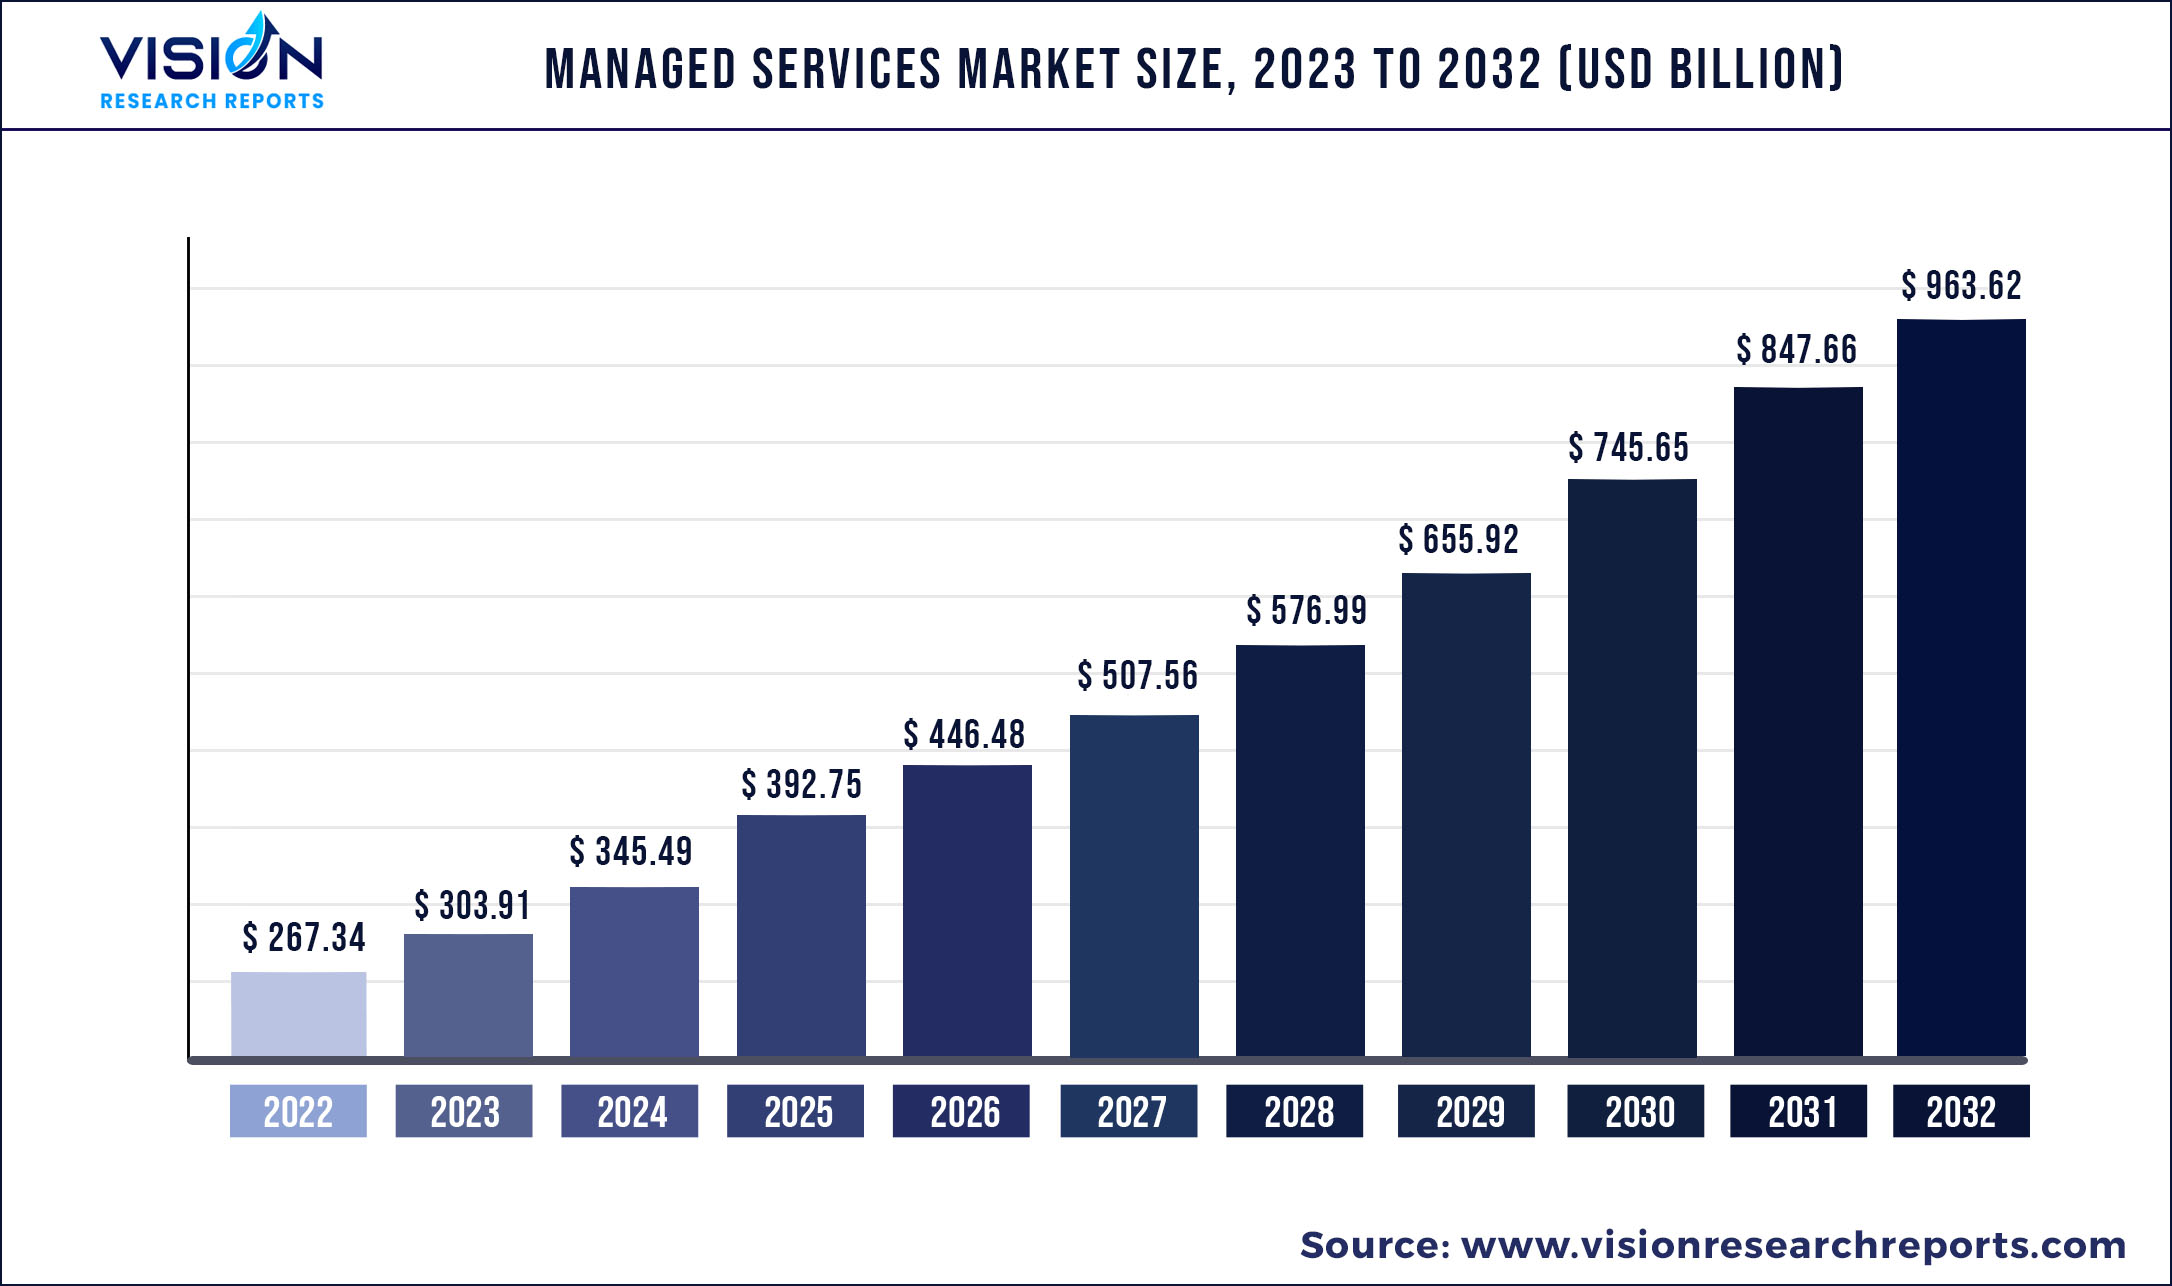 Managed Services Market Size 2023 to 2032